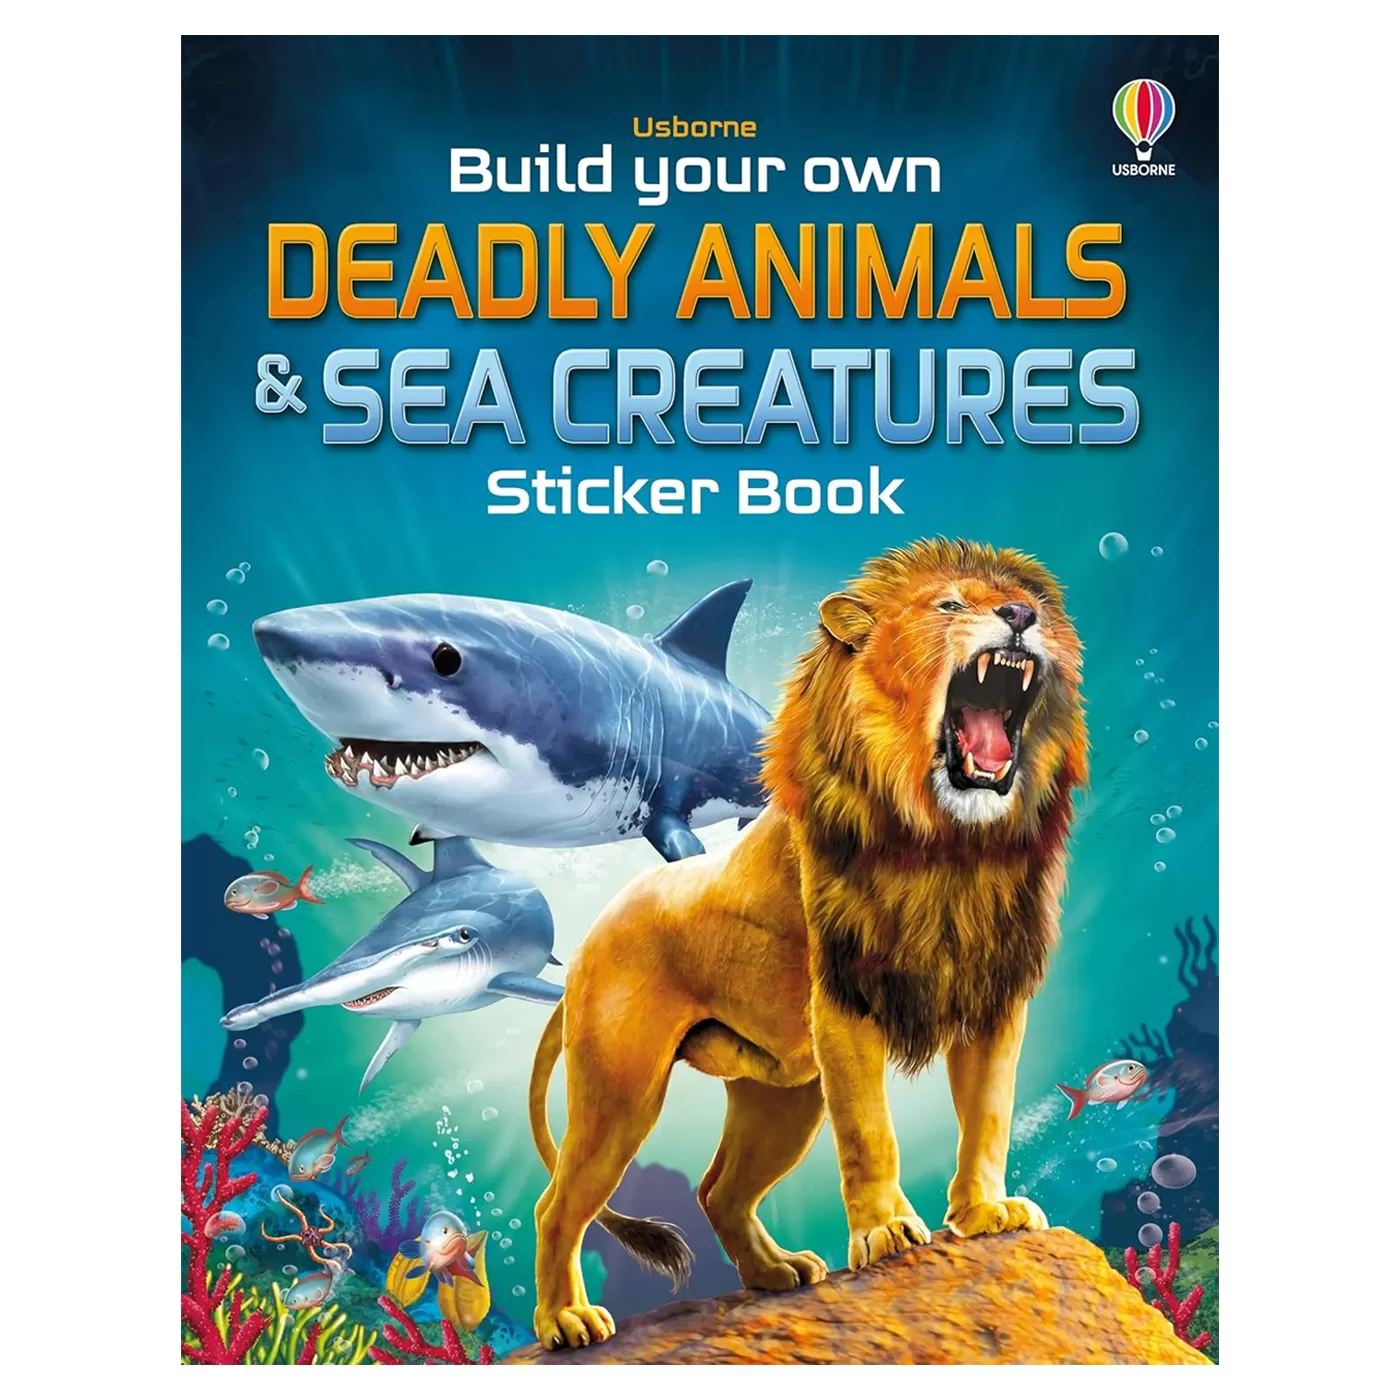  Build your own Deadly Animals and Sea Creatures Sticker Book